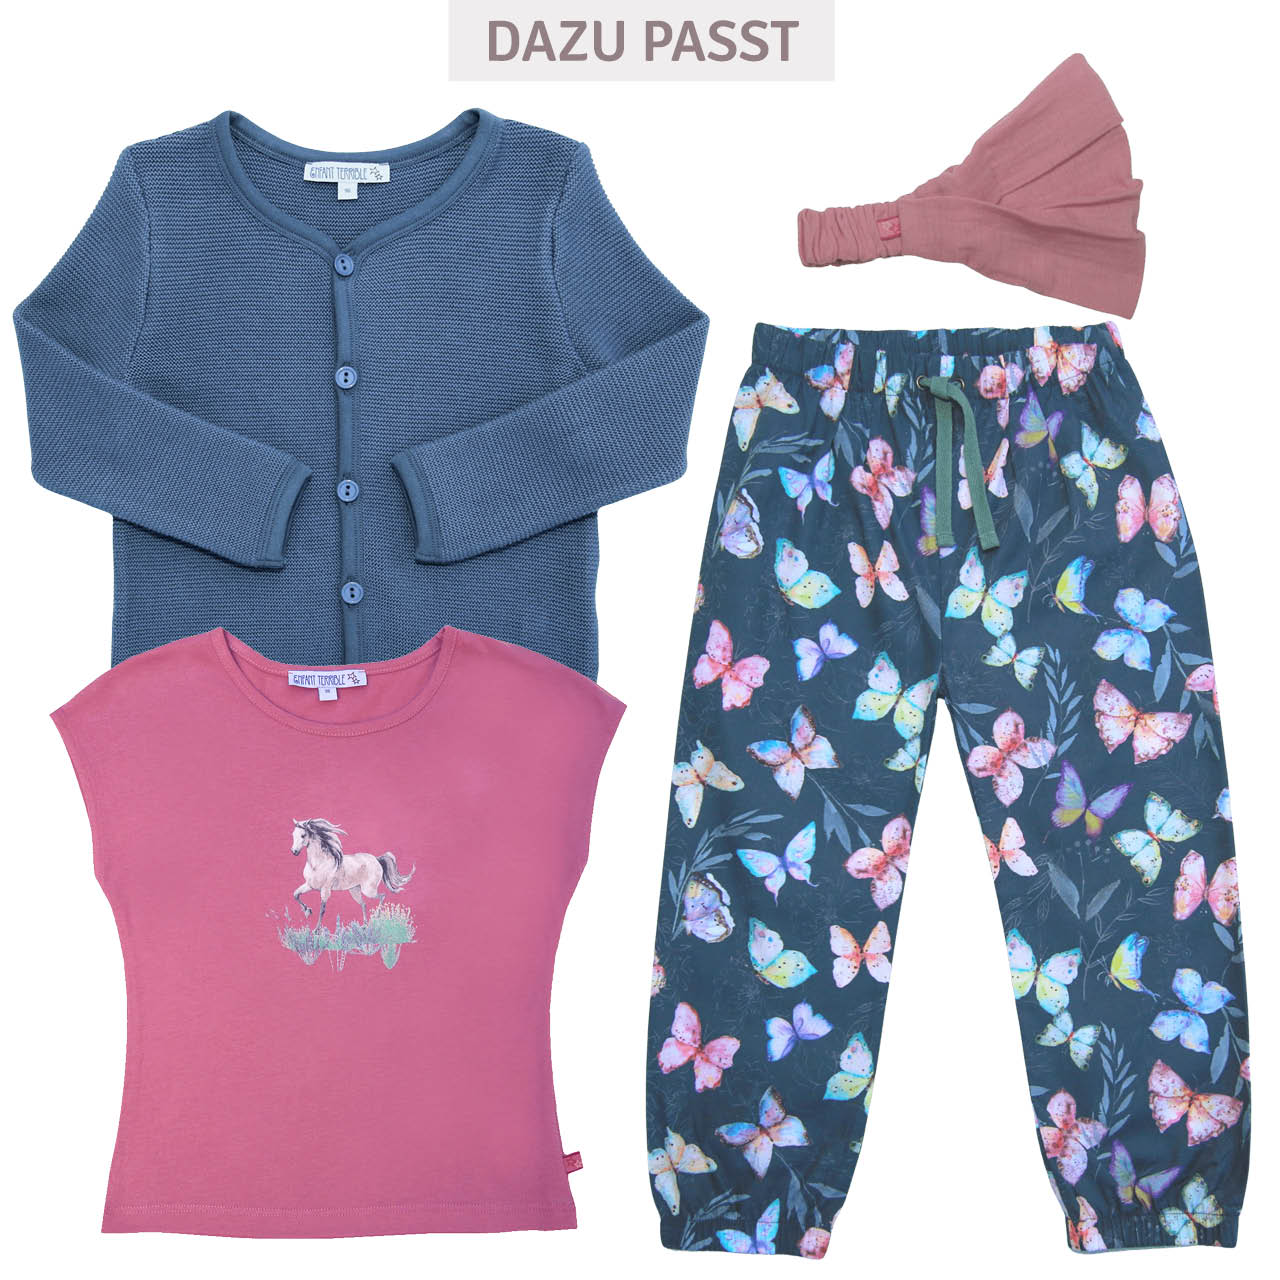 Sommer Haarband Musselin pastell rosa